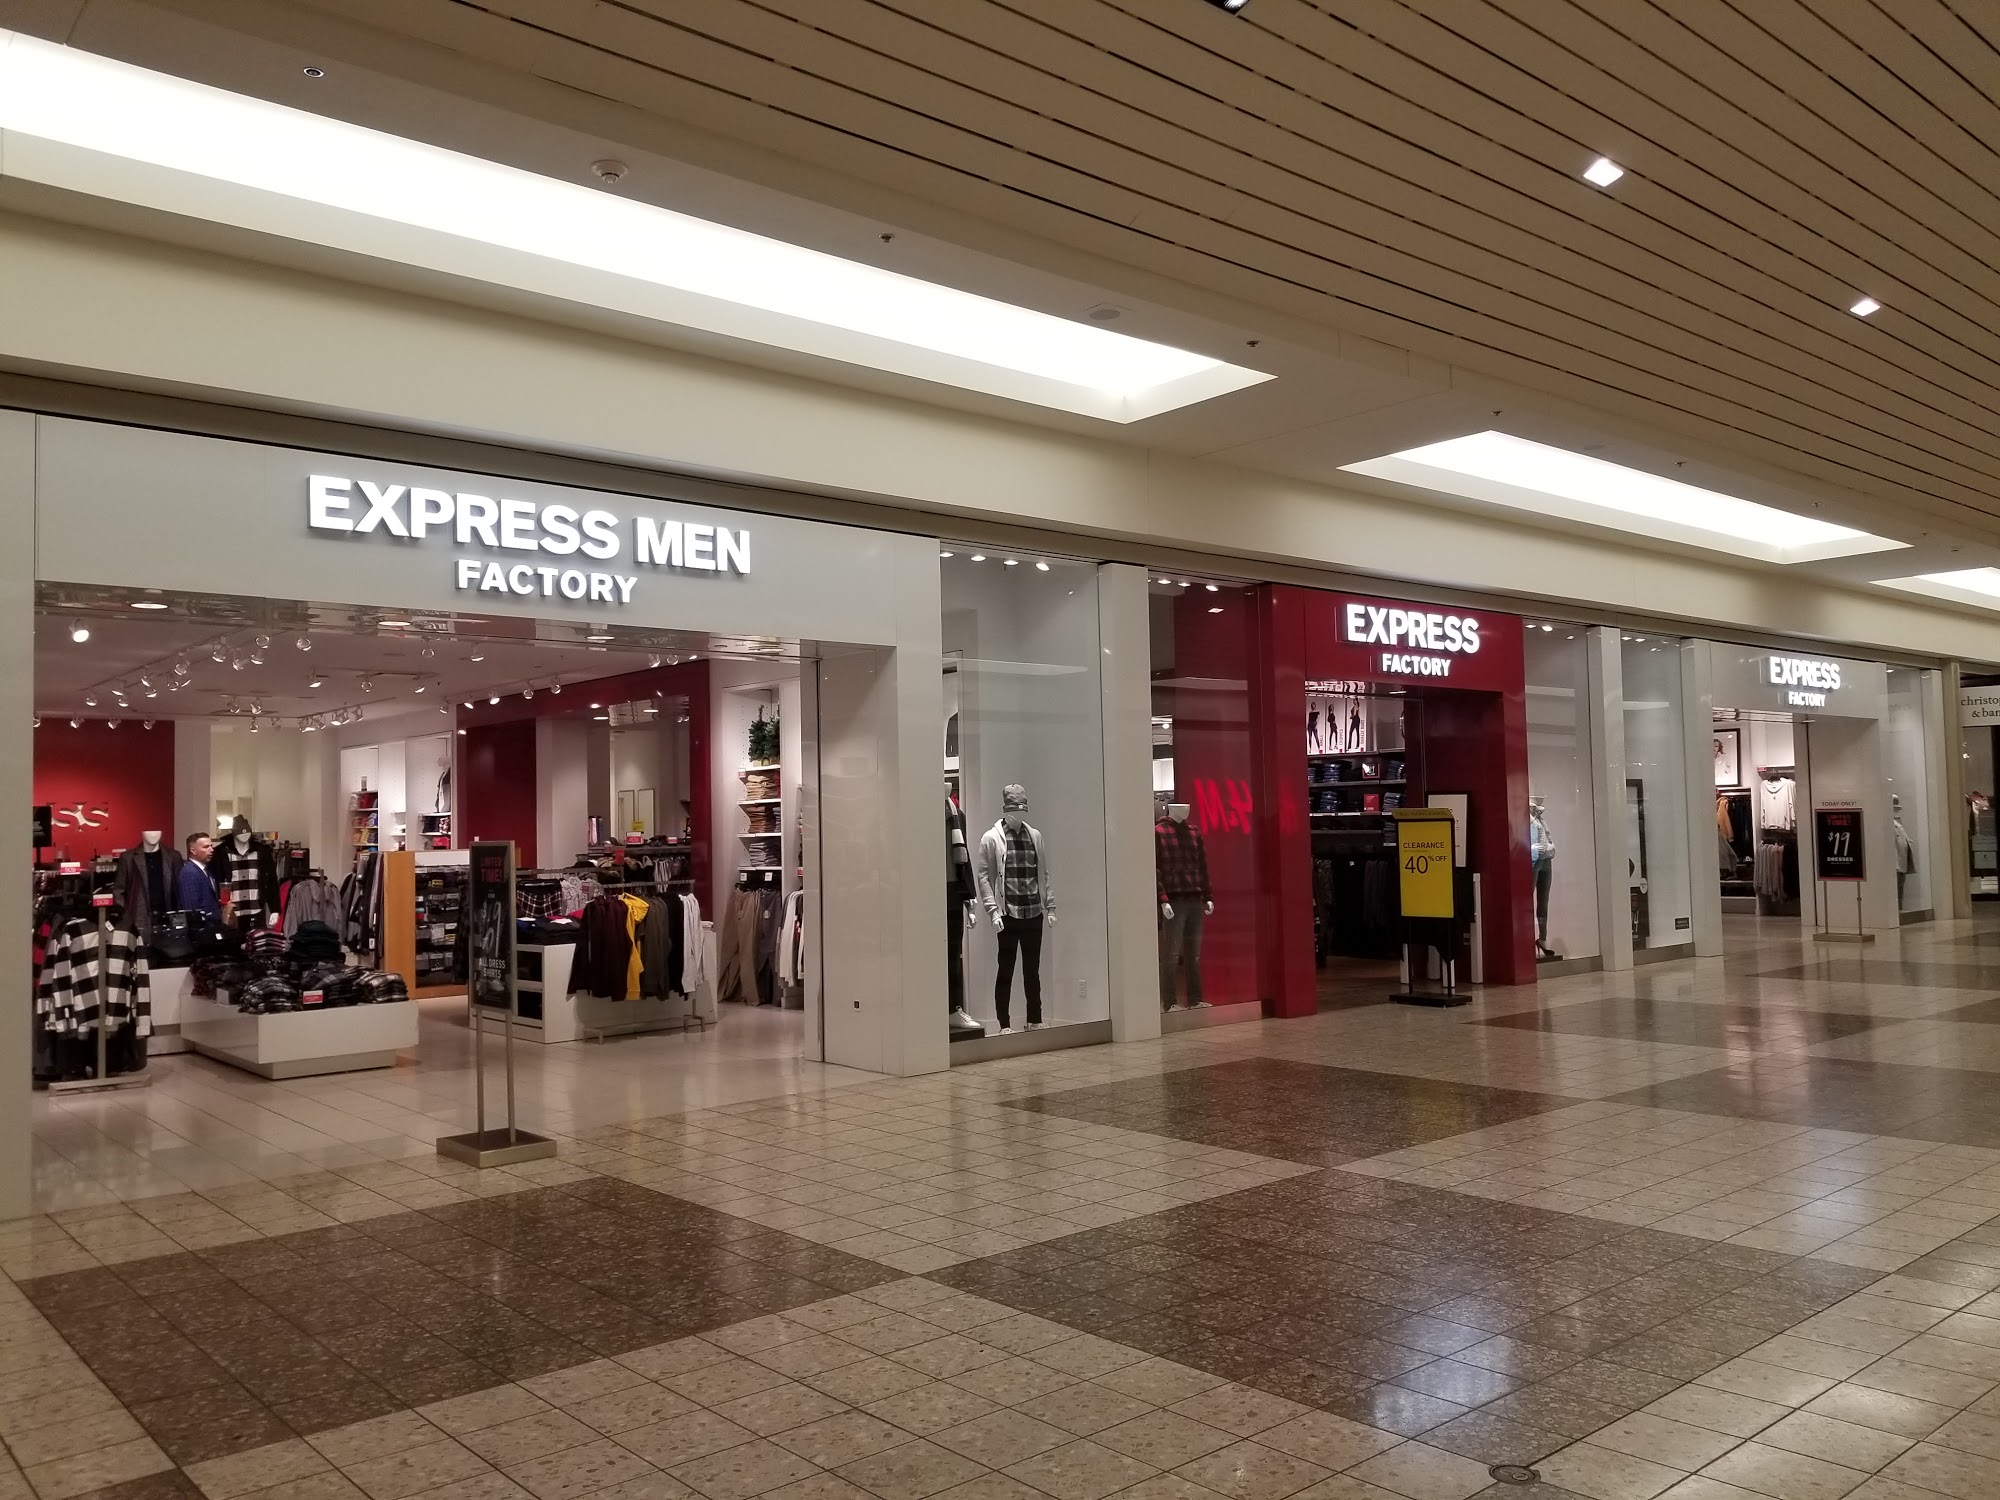 Express Factory Outlet